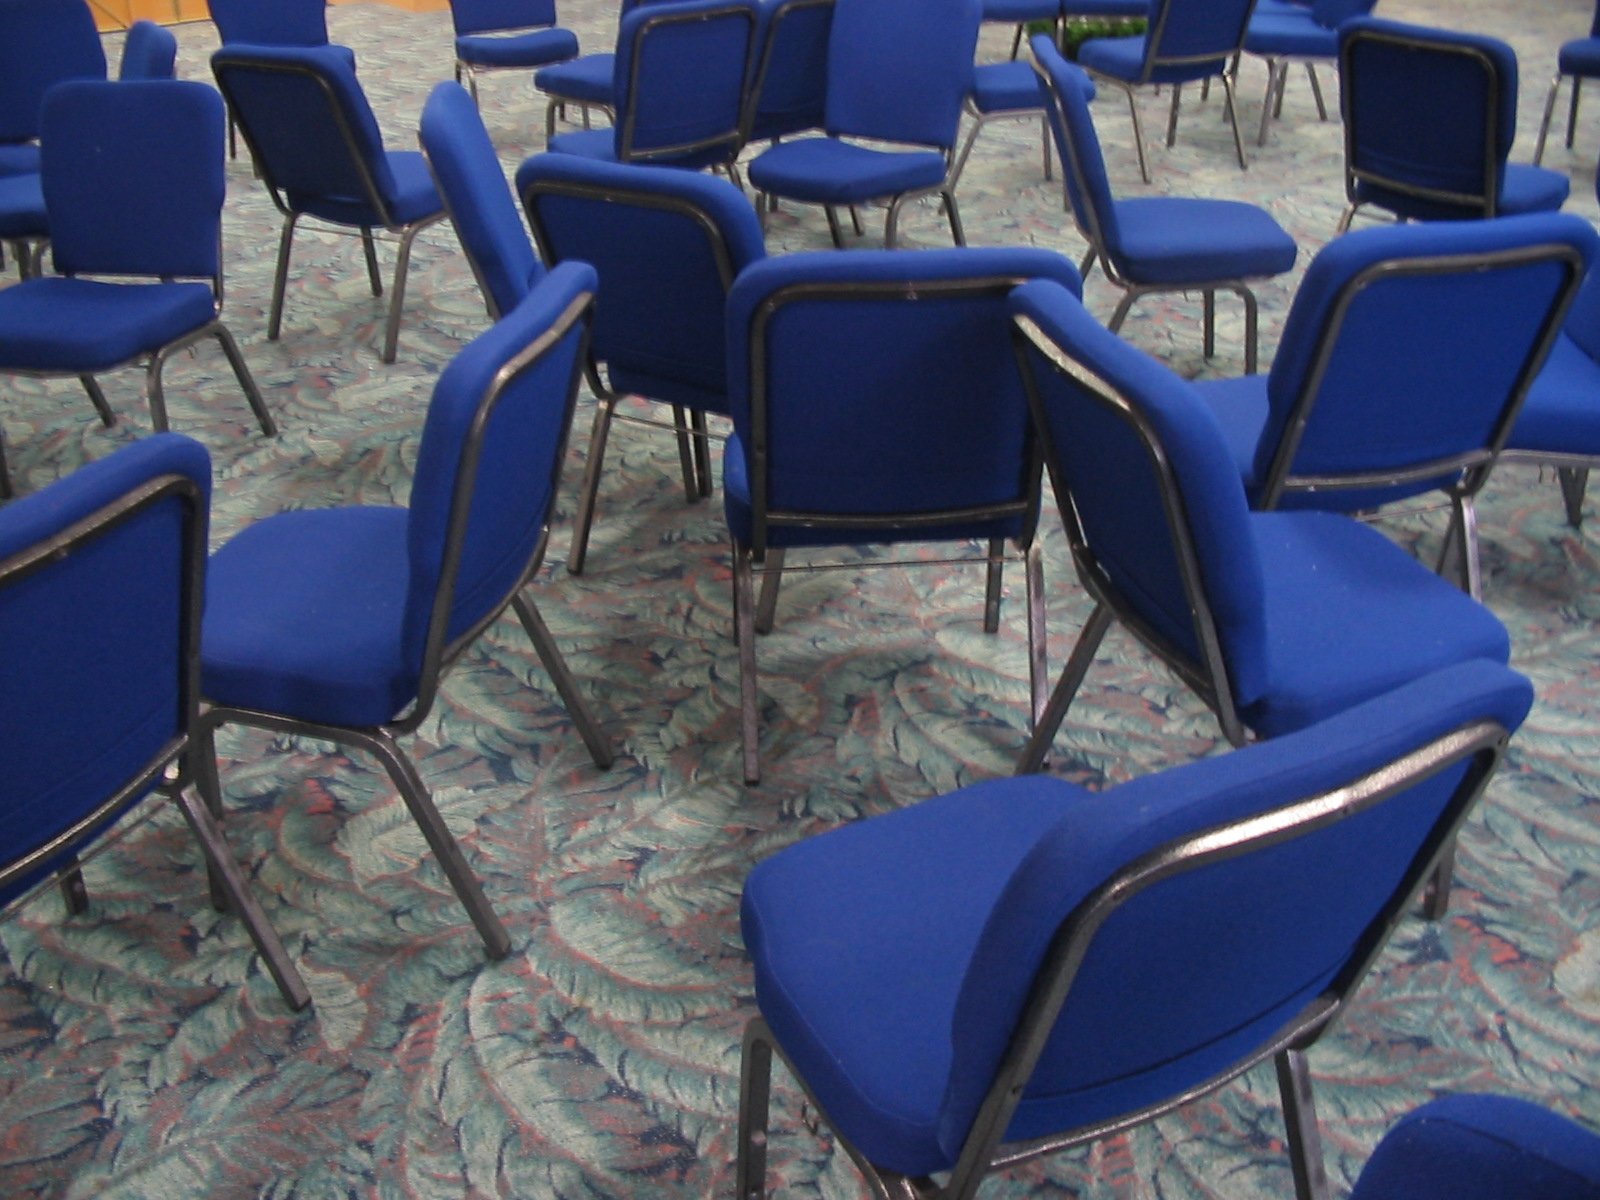 an arrangement of blue chairs in a room